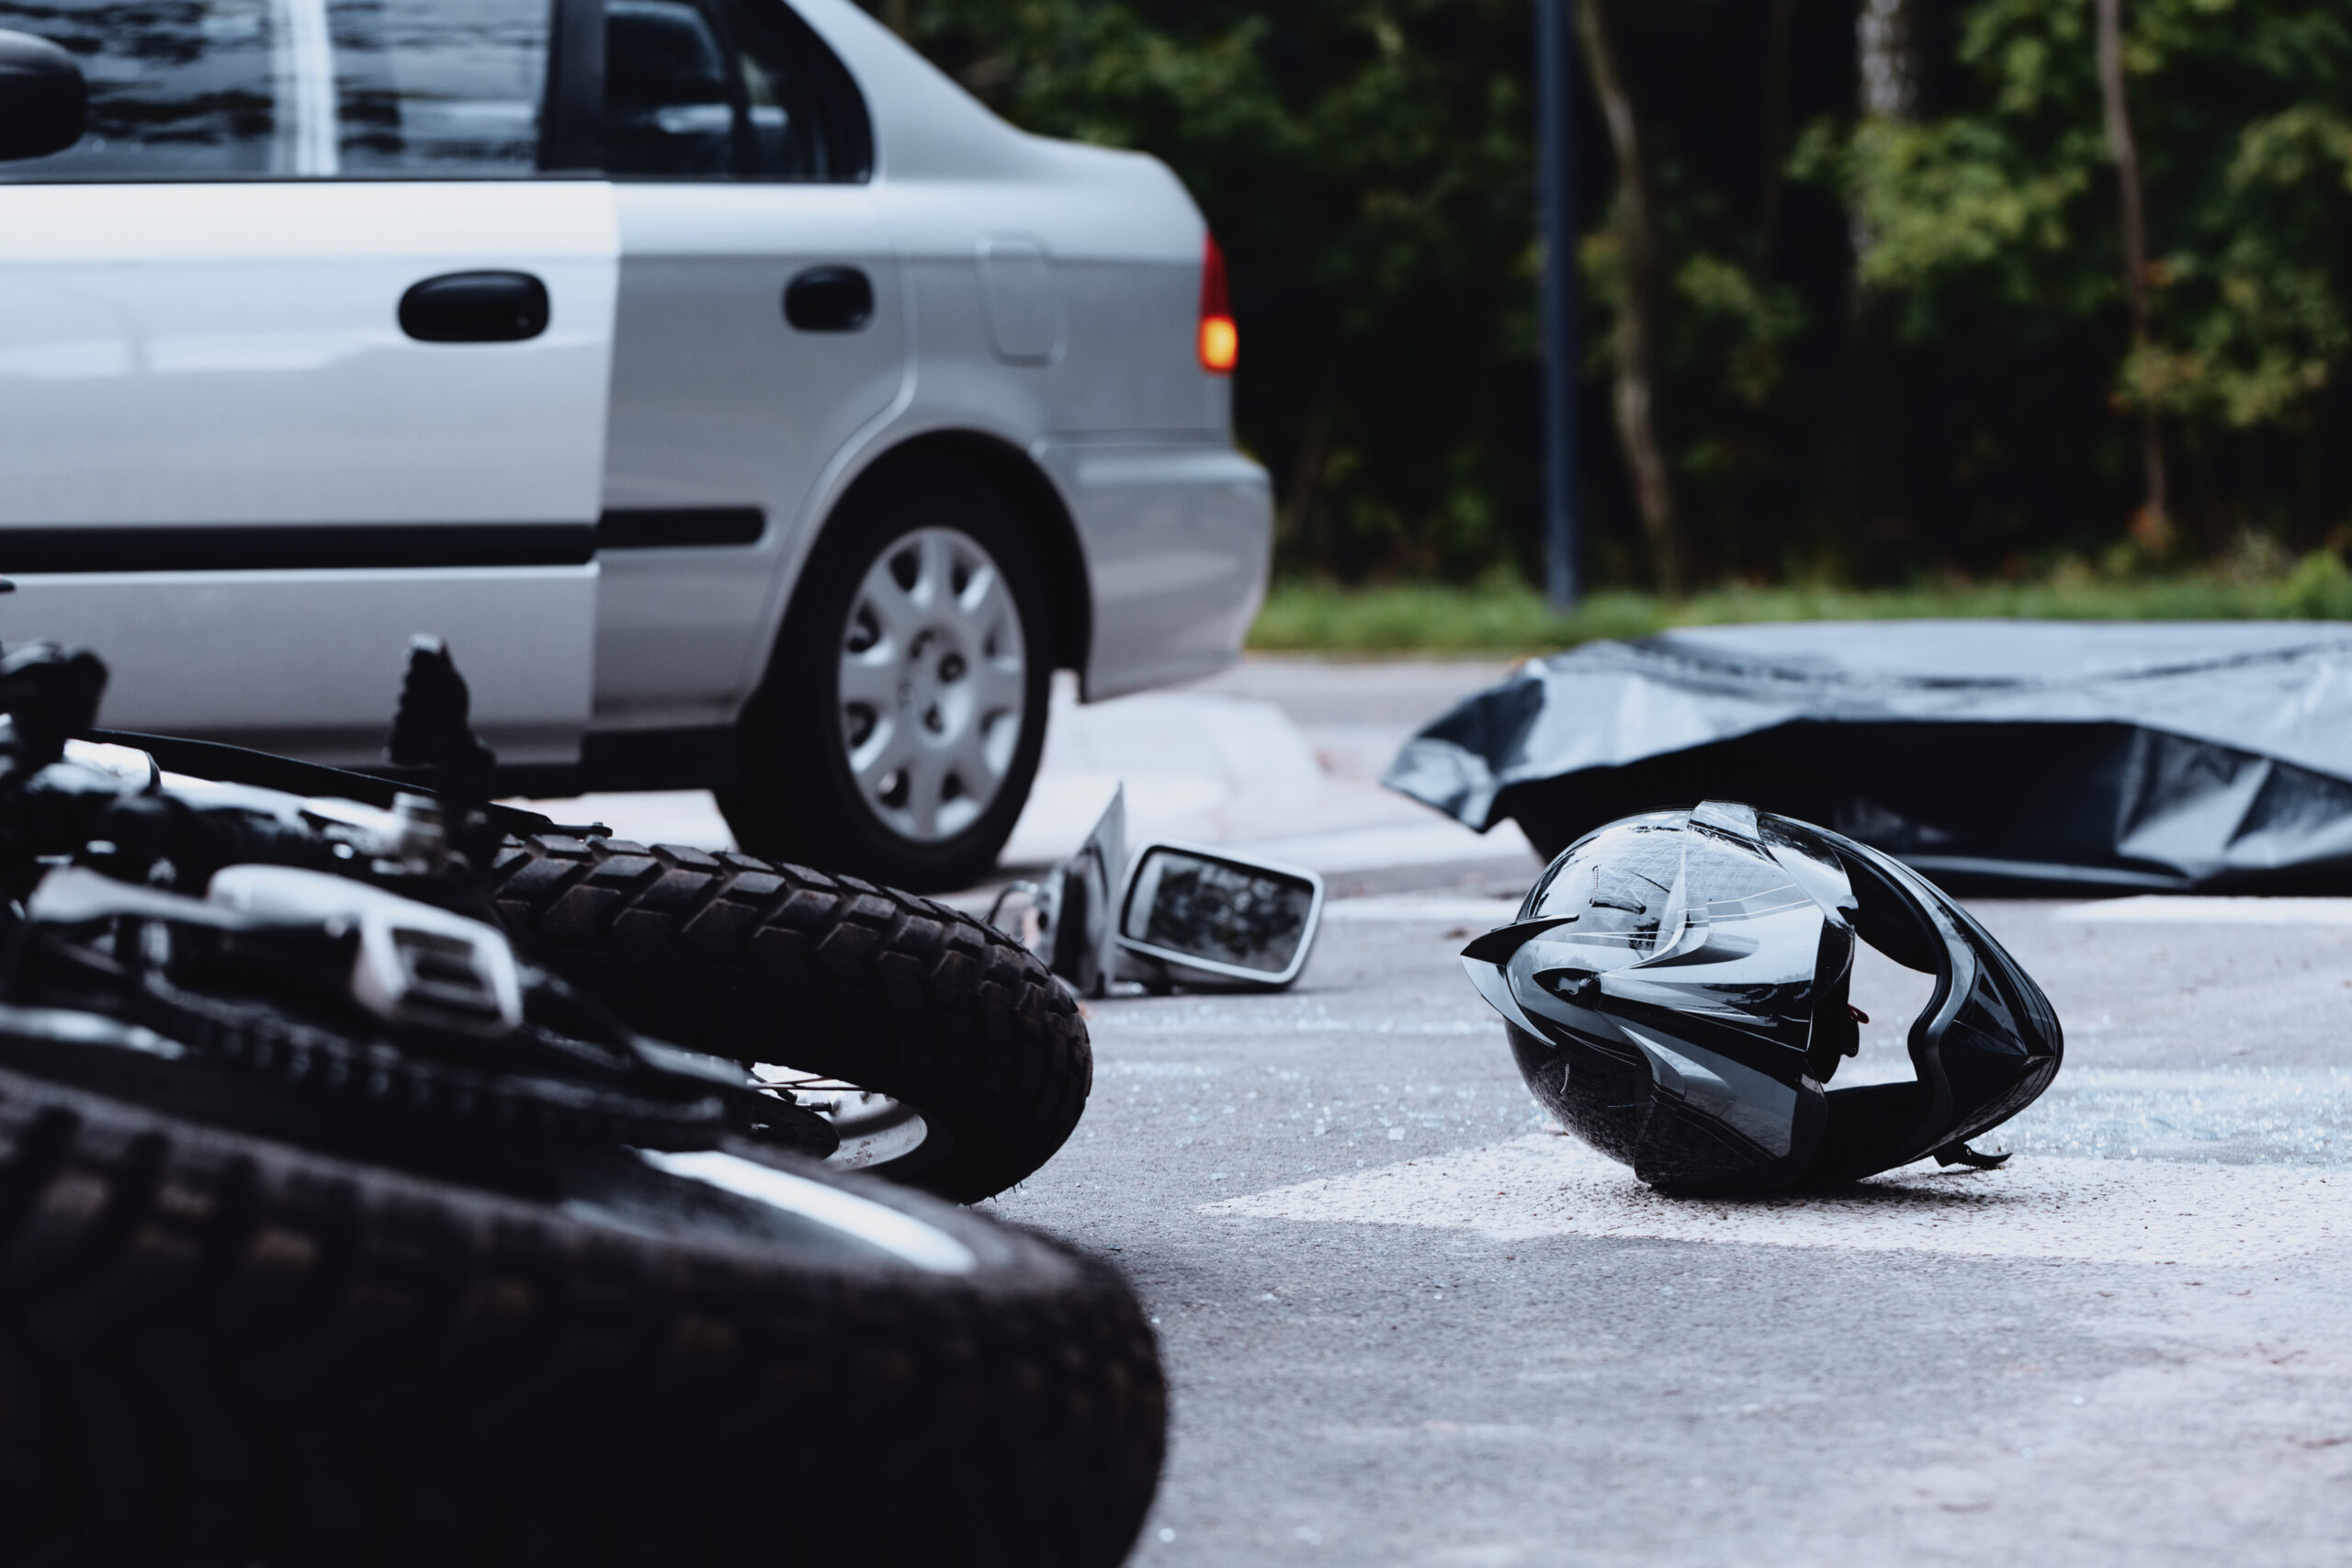 The Risk of Motorcycle Accidents on Florida Highways